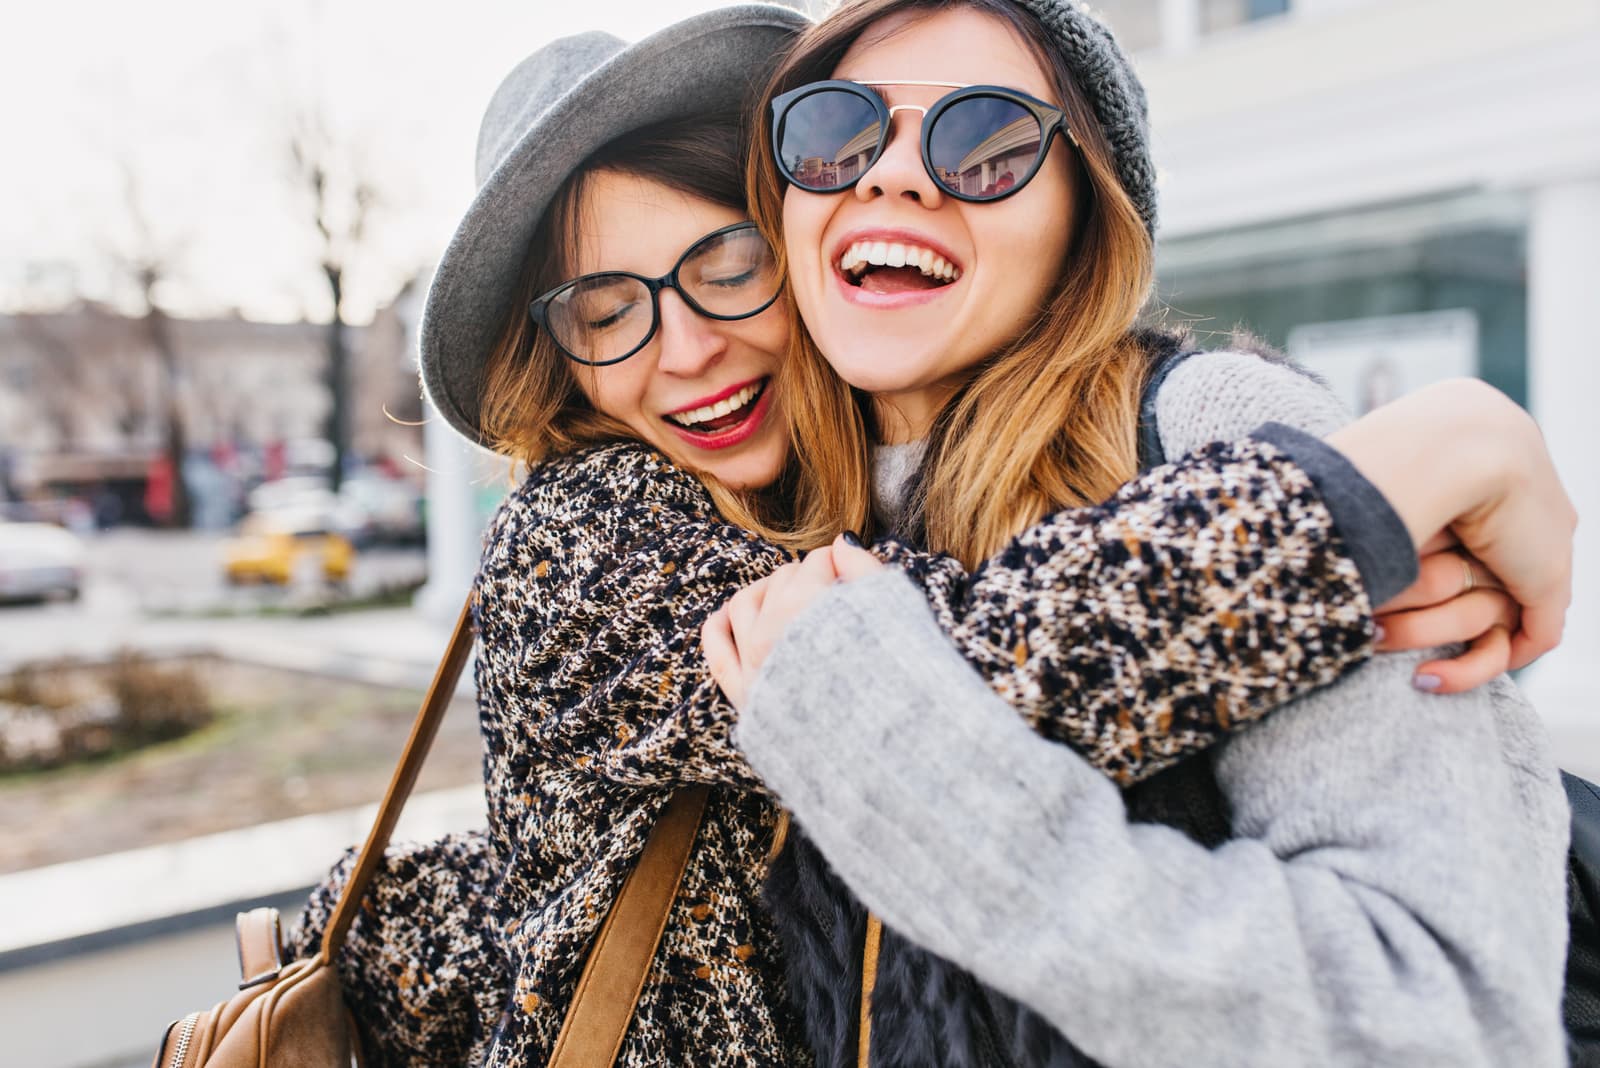 50 Sweetest ‘Thank You For Being My Friend’ Quotes And Texts